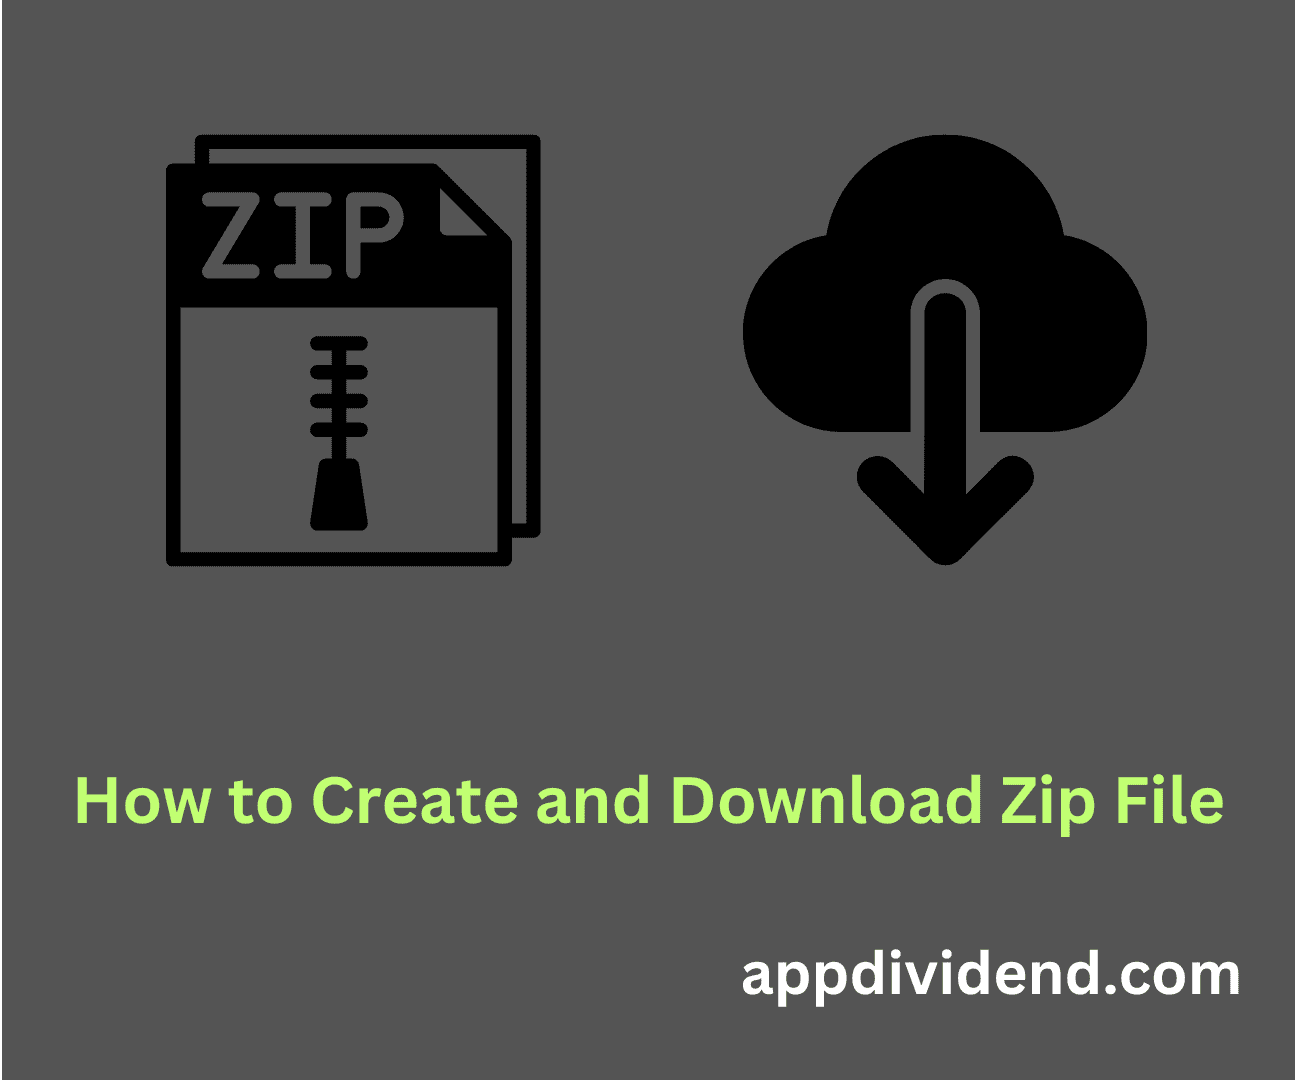 How to Create and Download Zip File